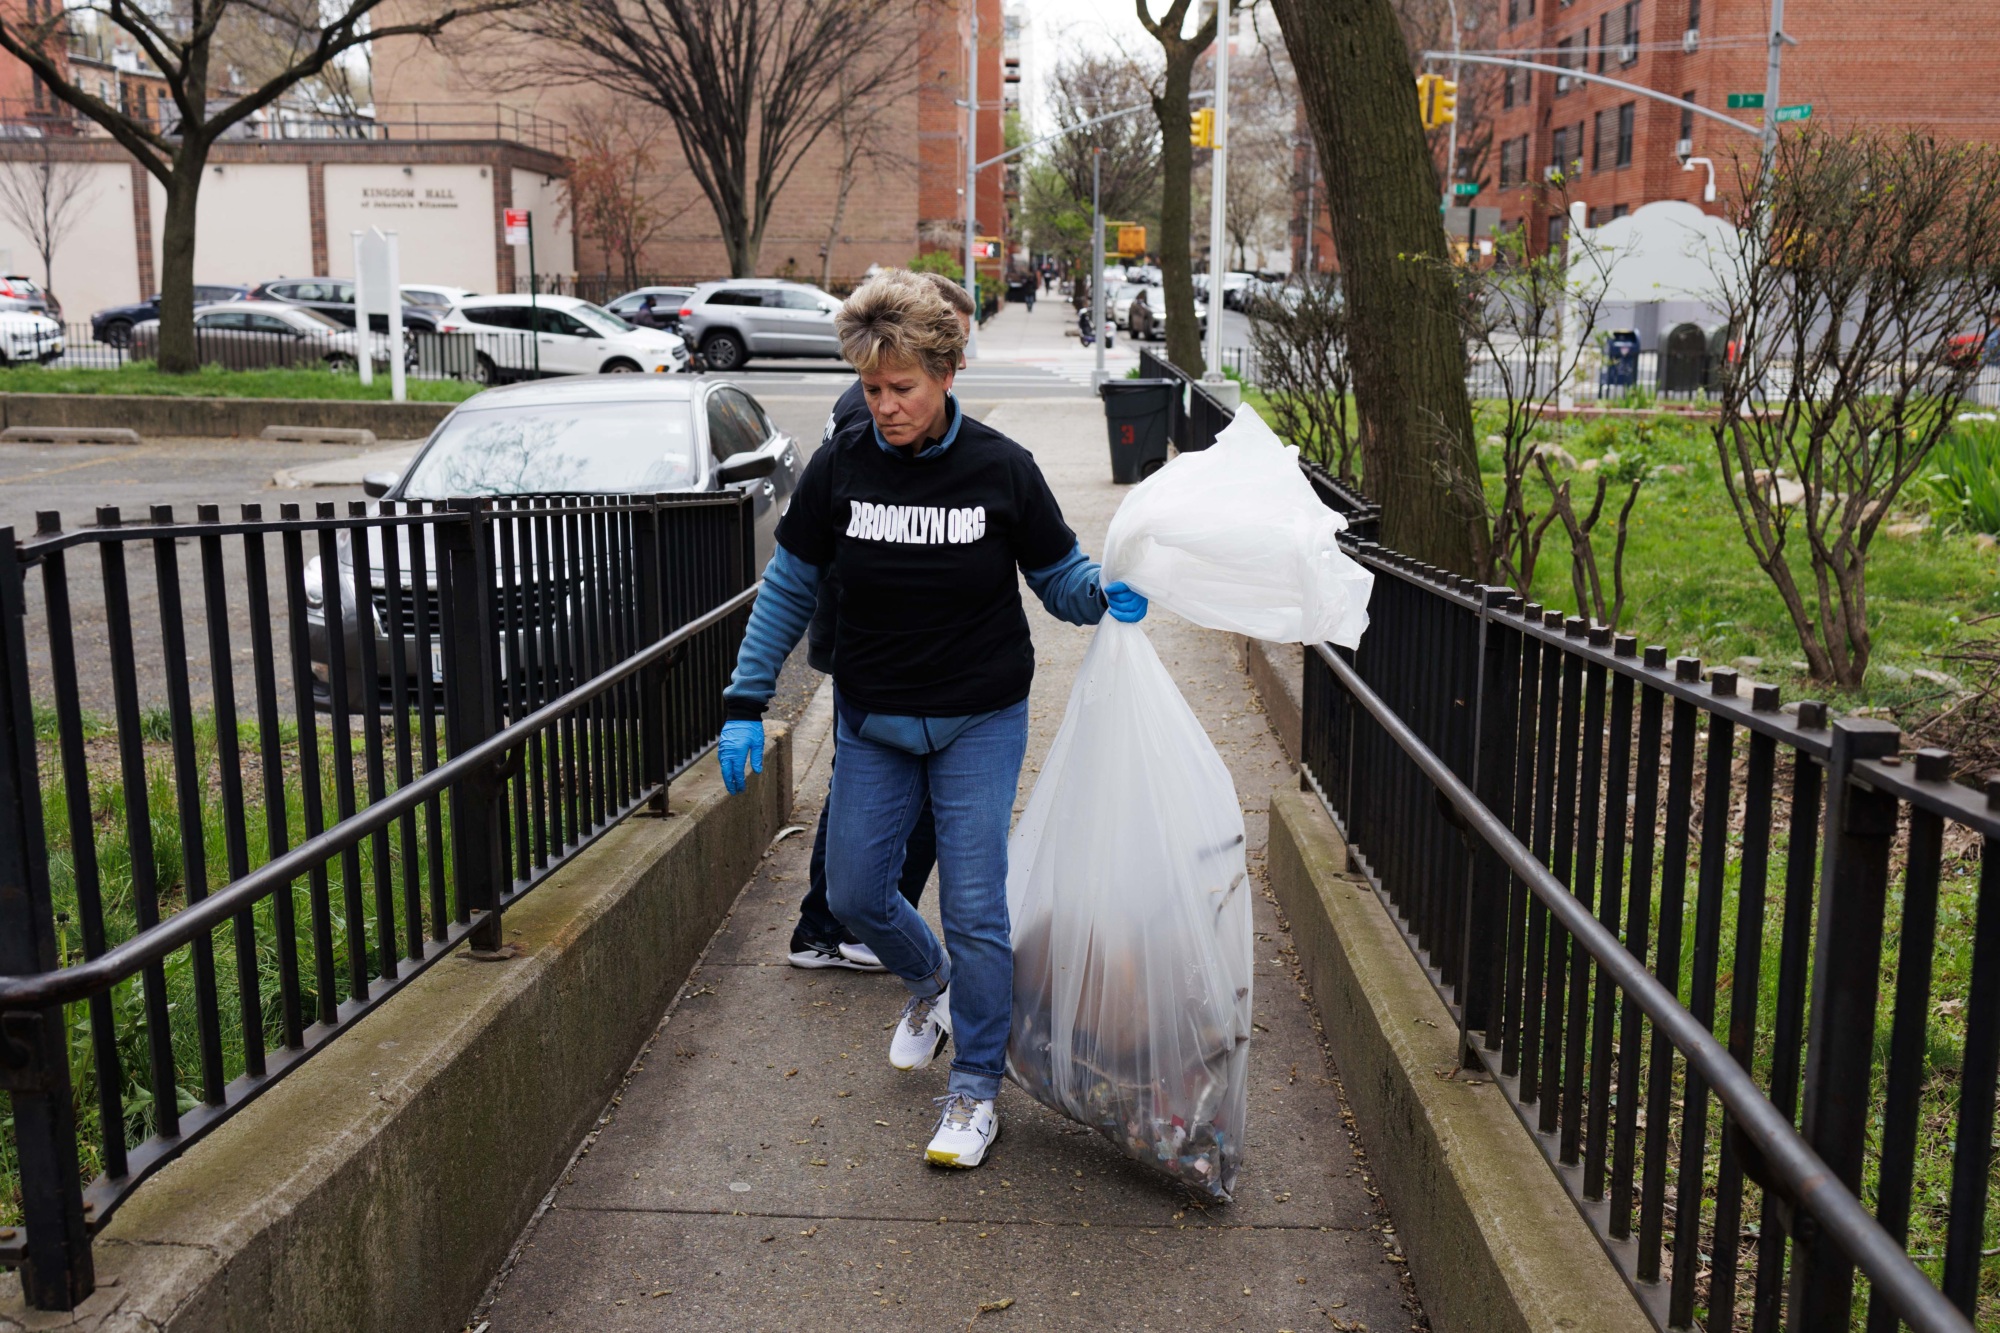 A woman wearing a sweatshirt and gloves carries a large clear trash bag down a small stairway in a city setting.